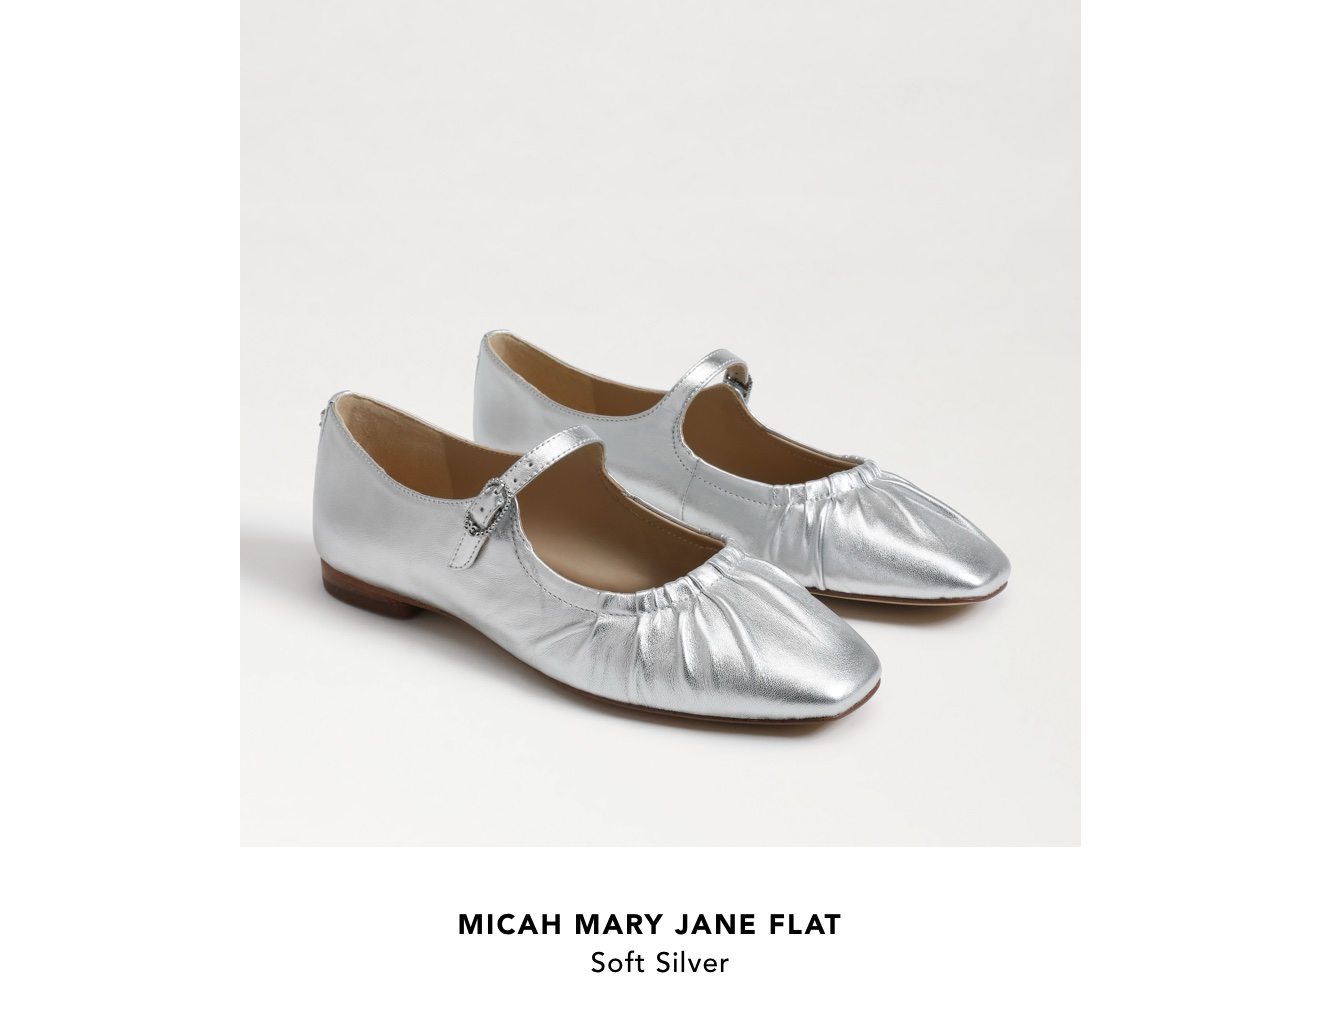 Micah Mary Jane Flat (Soft Silver)